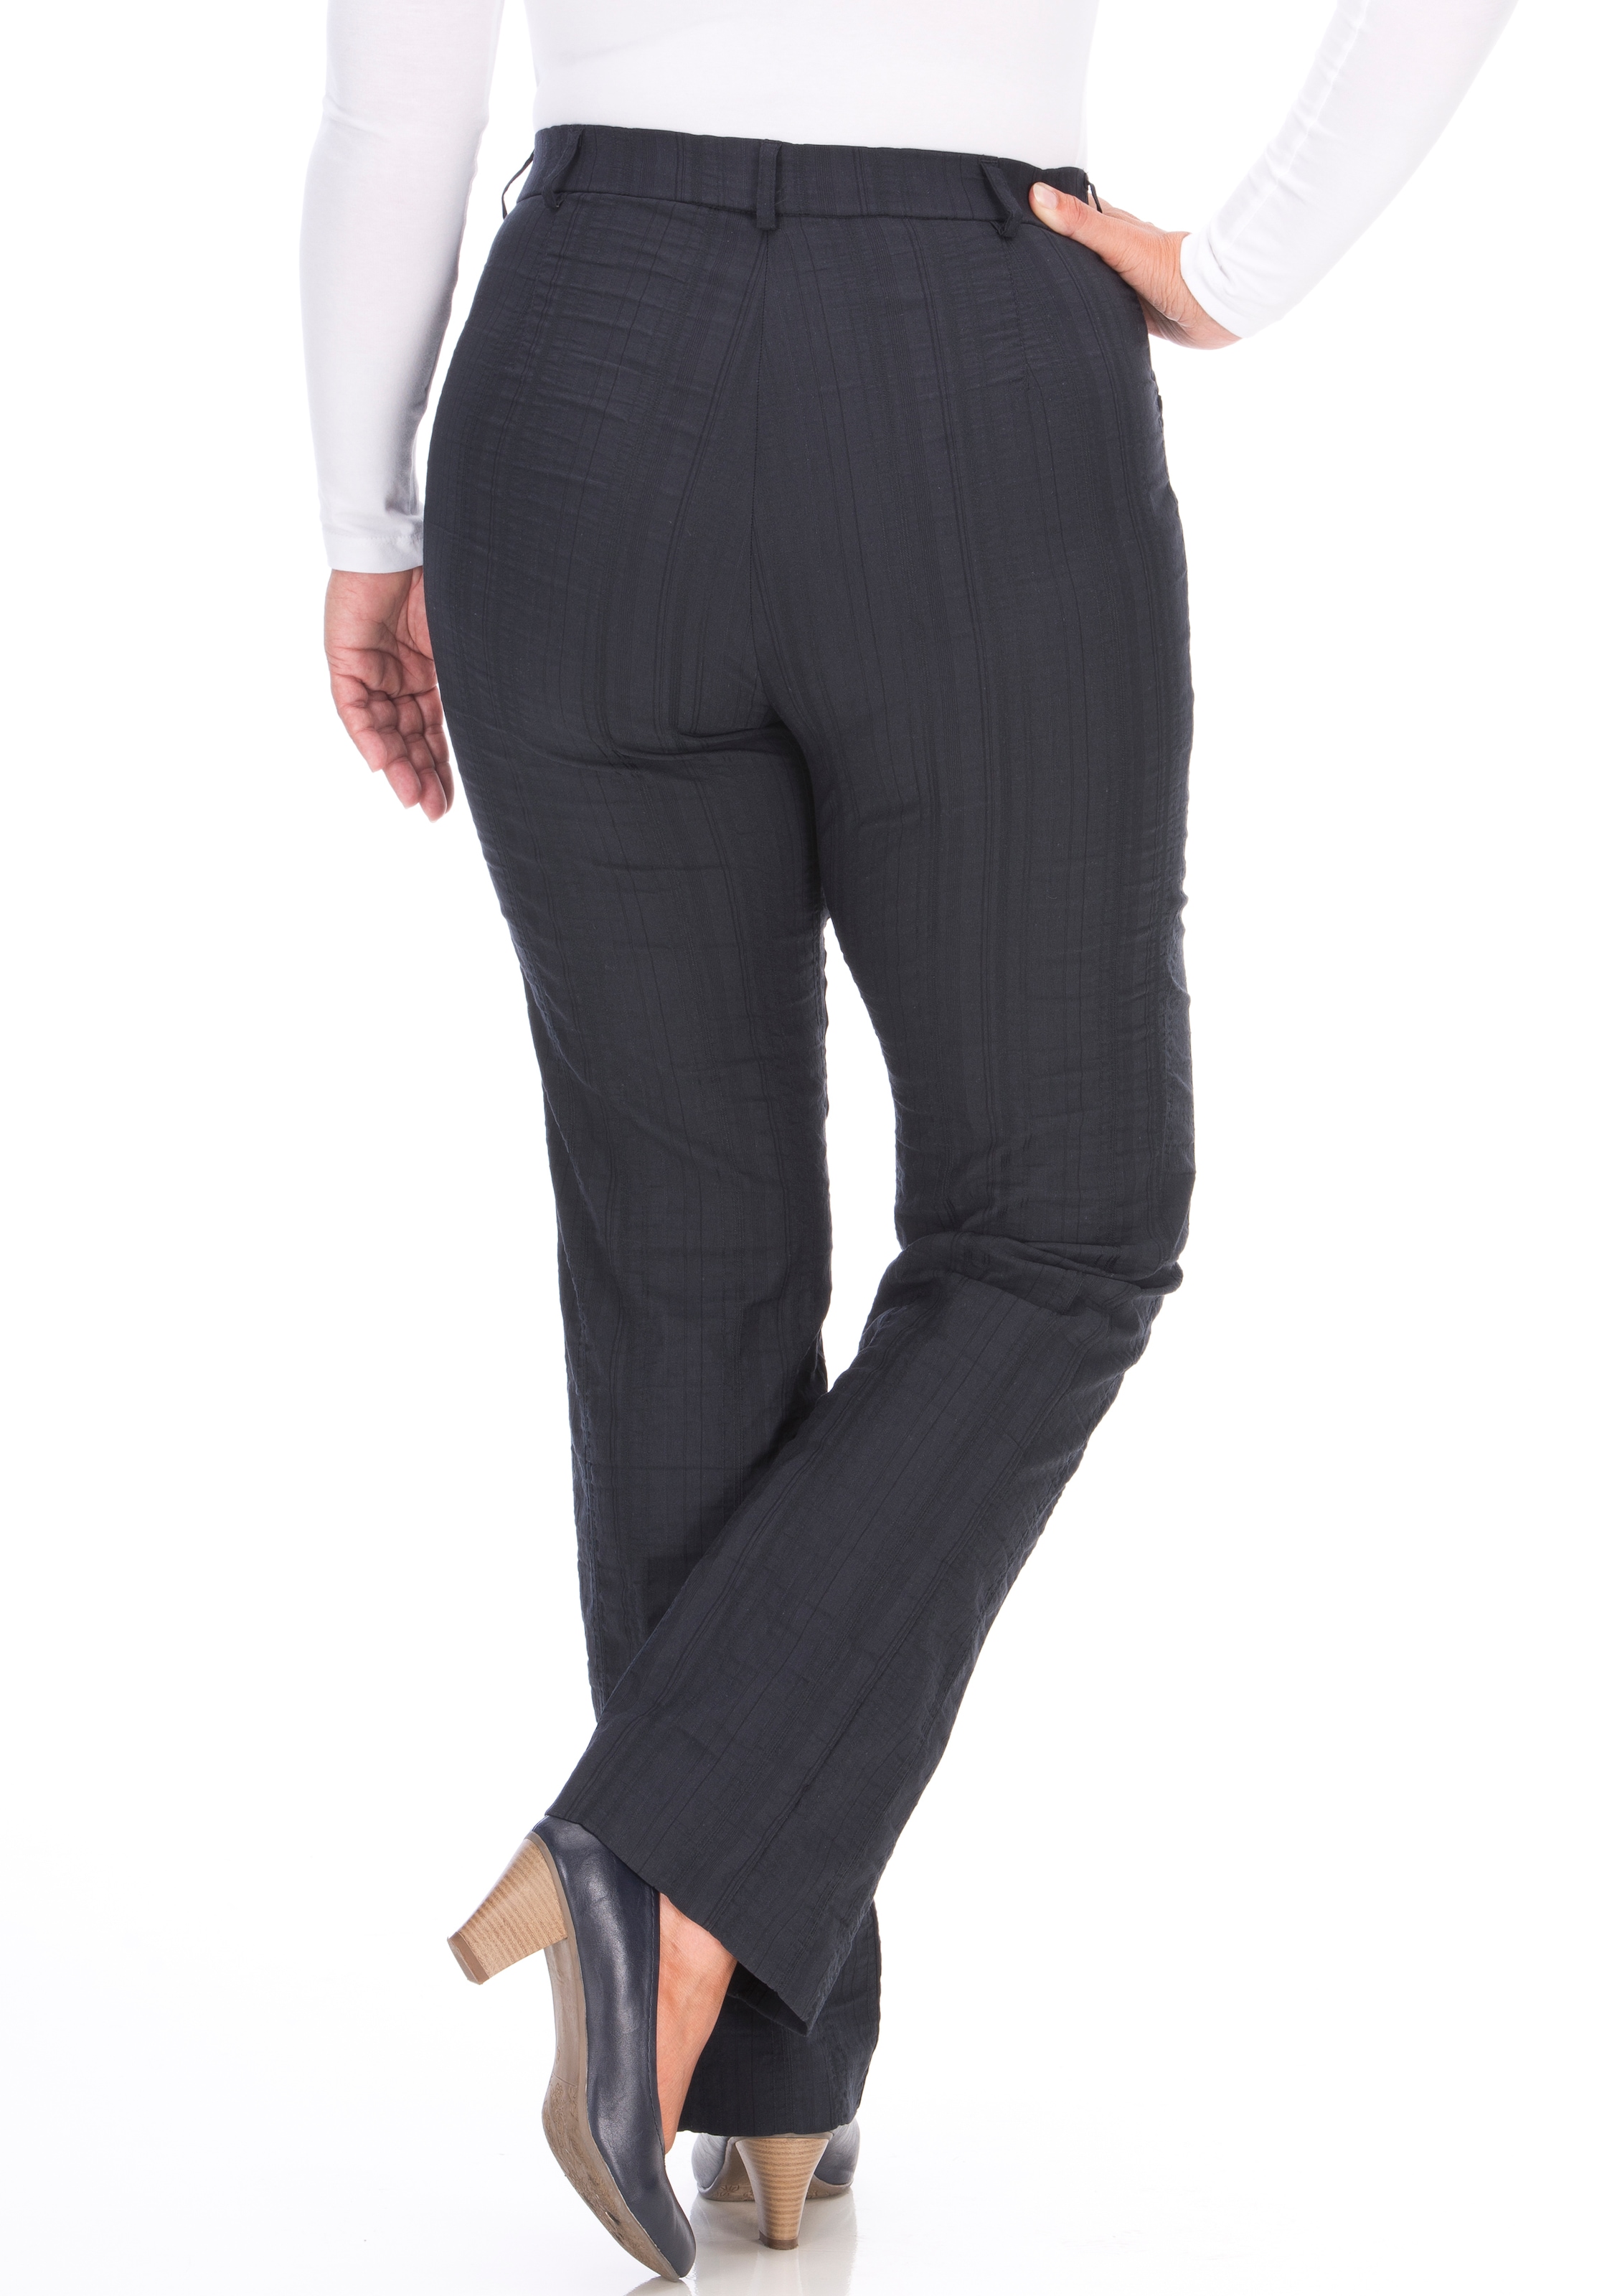 KjBRAND Stoffhose bei optimale Passform Quer-Stretch OTTO »Bea«, in